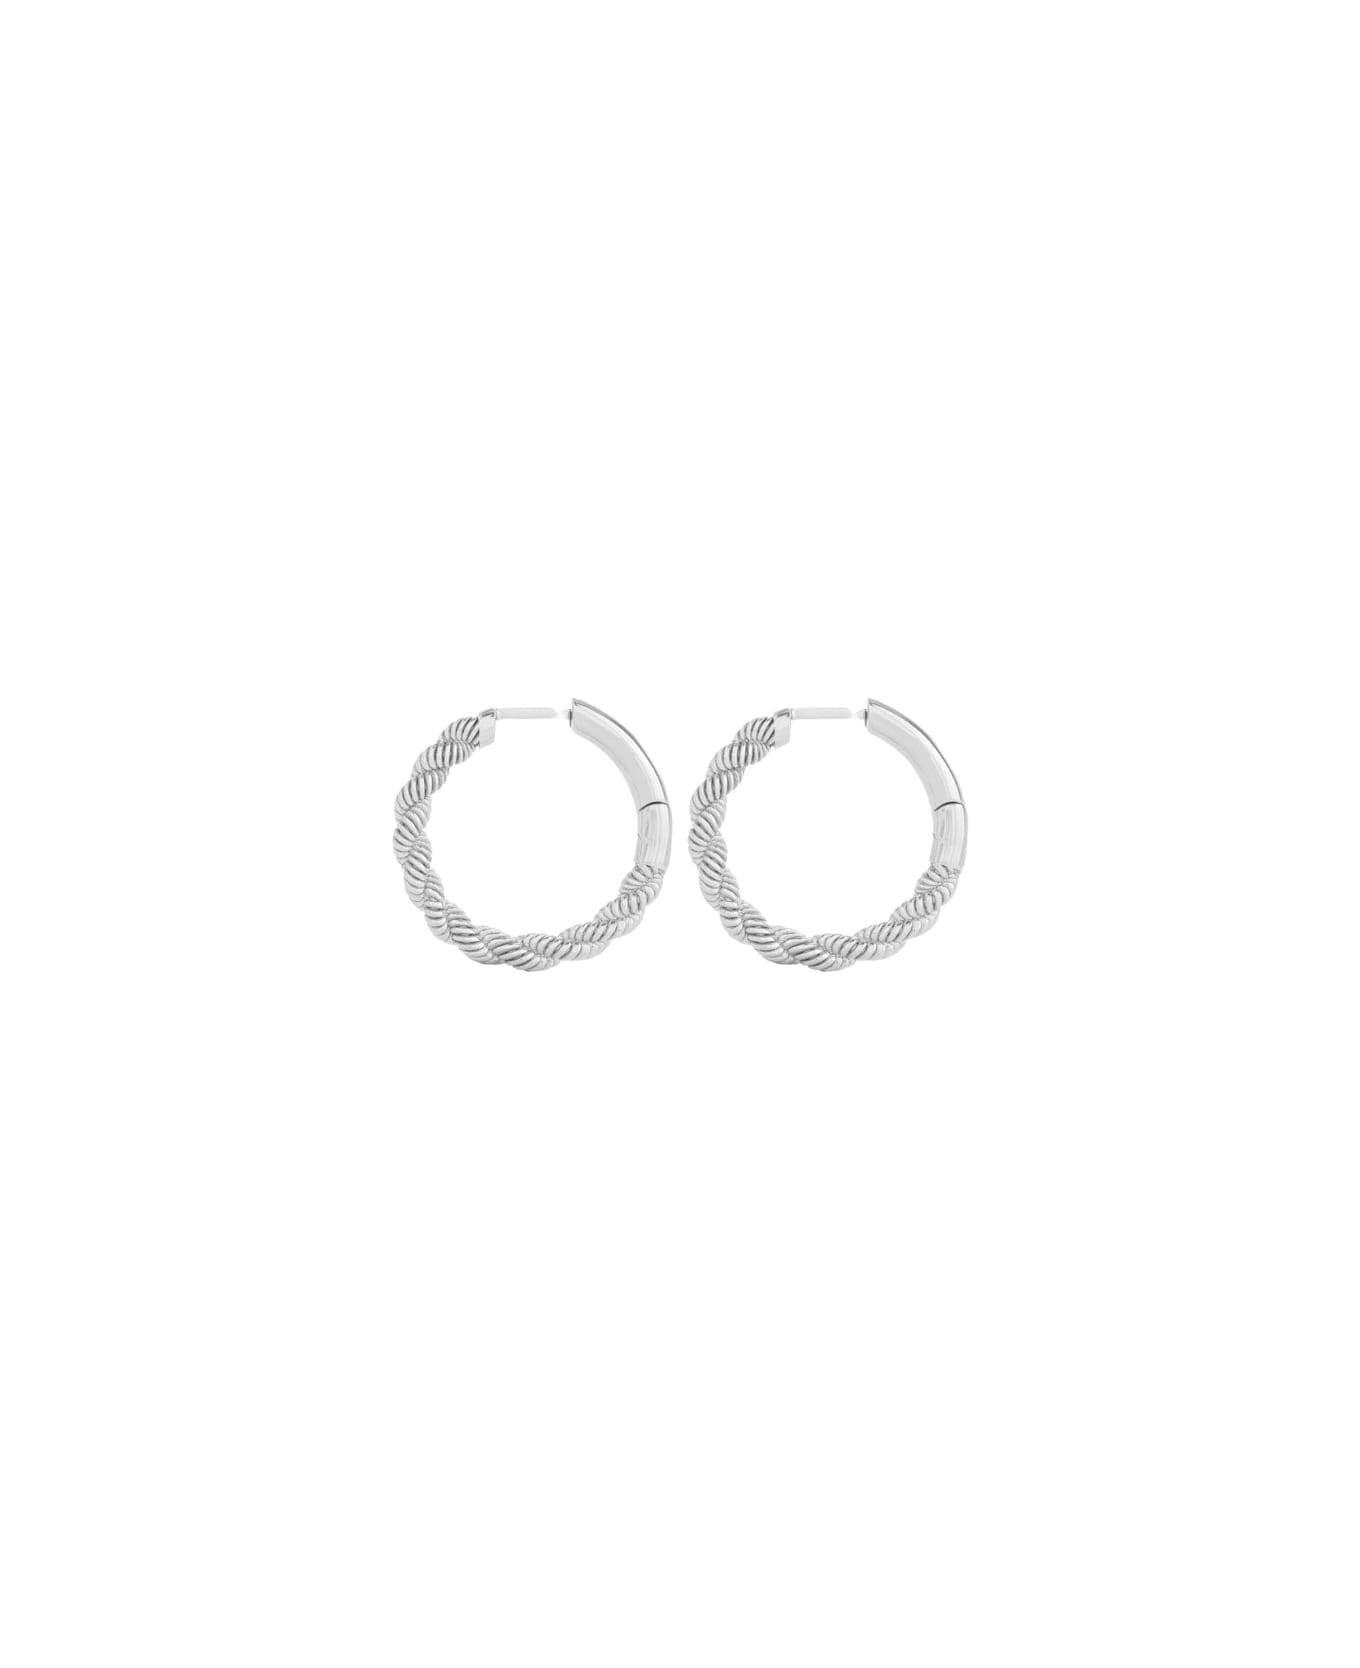 Federica Tosi Earring Round Grace Silver - Silver イヤリング